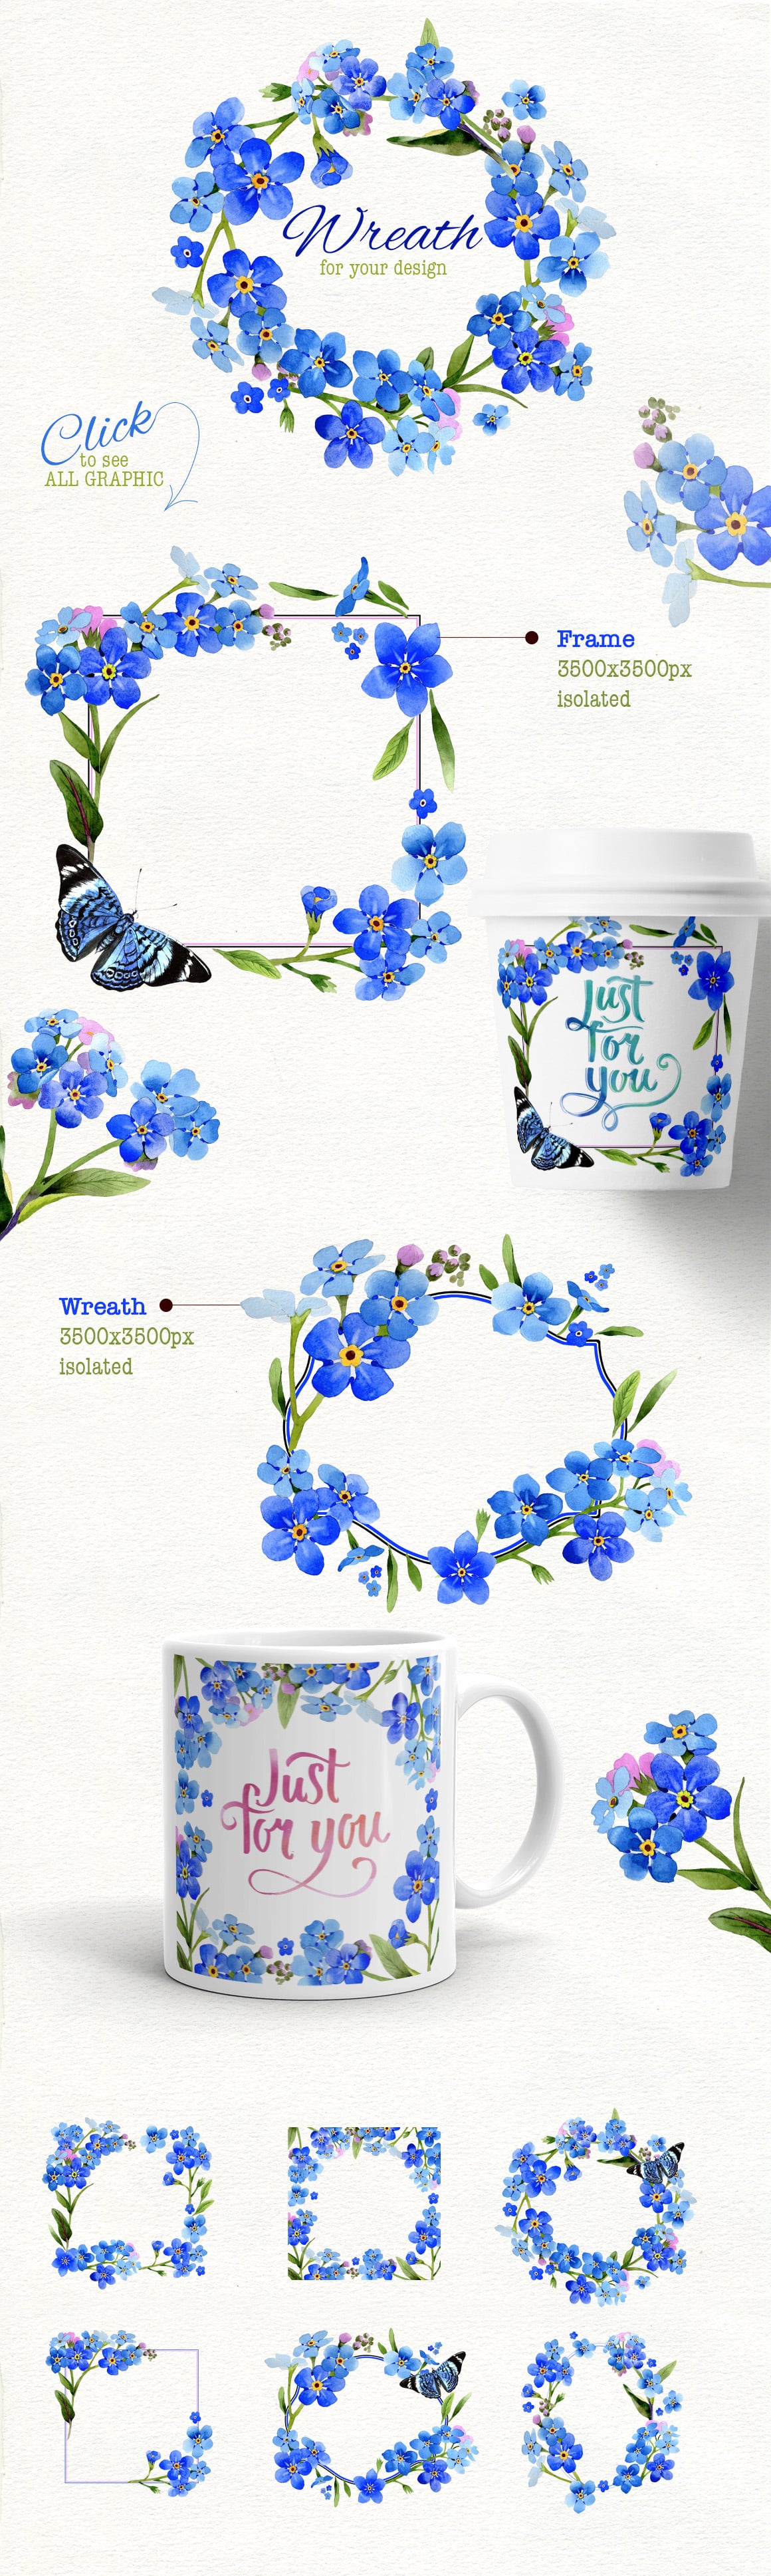 Diverse of myosotis flowers in different shapes.